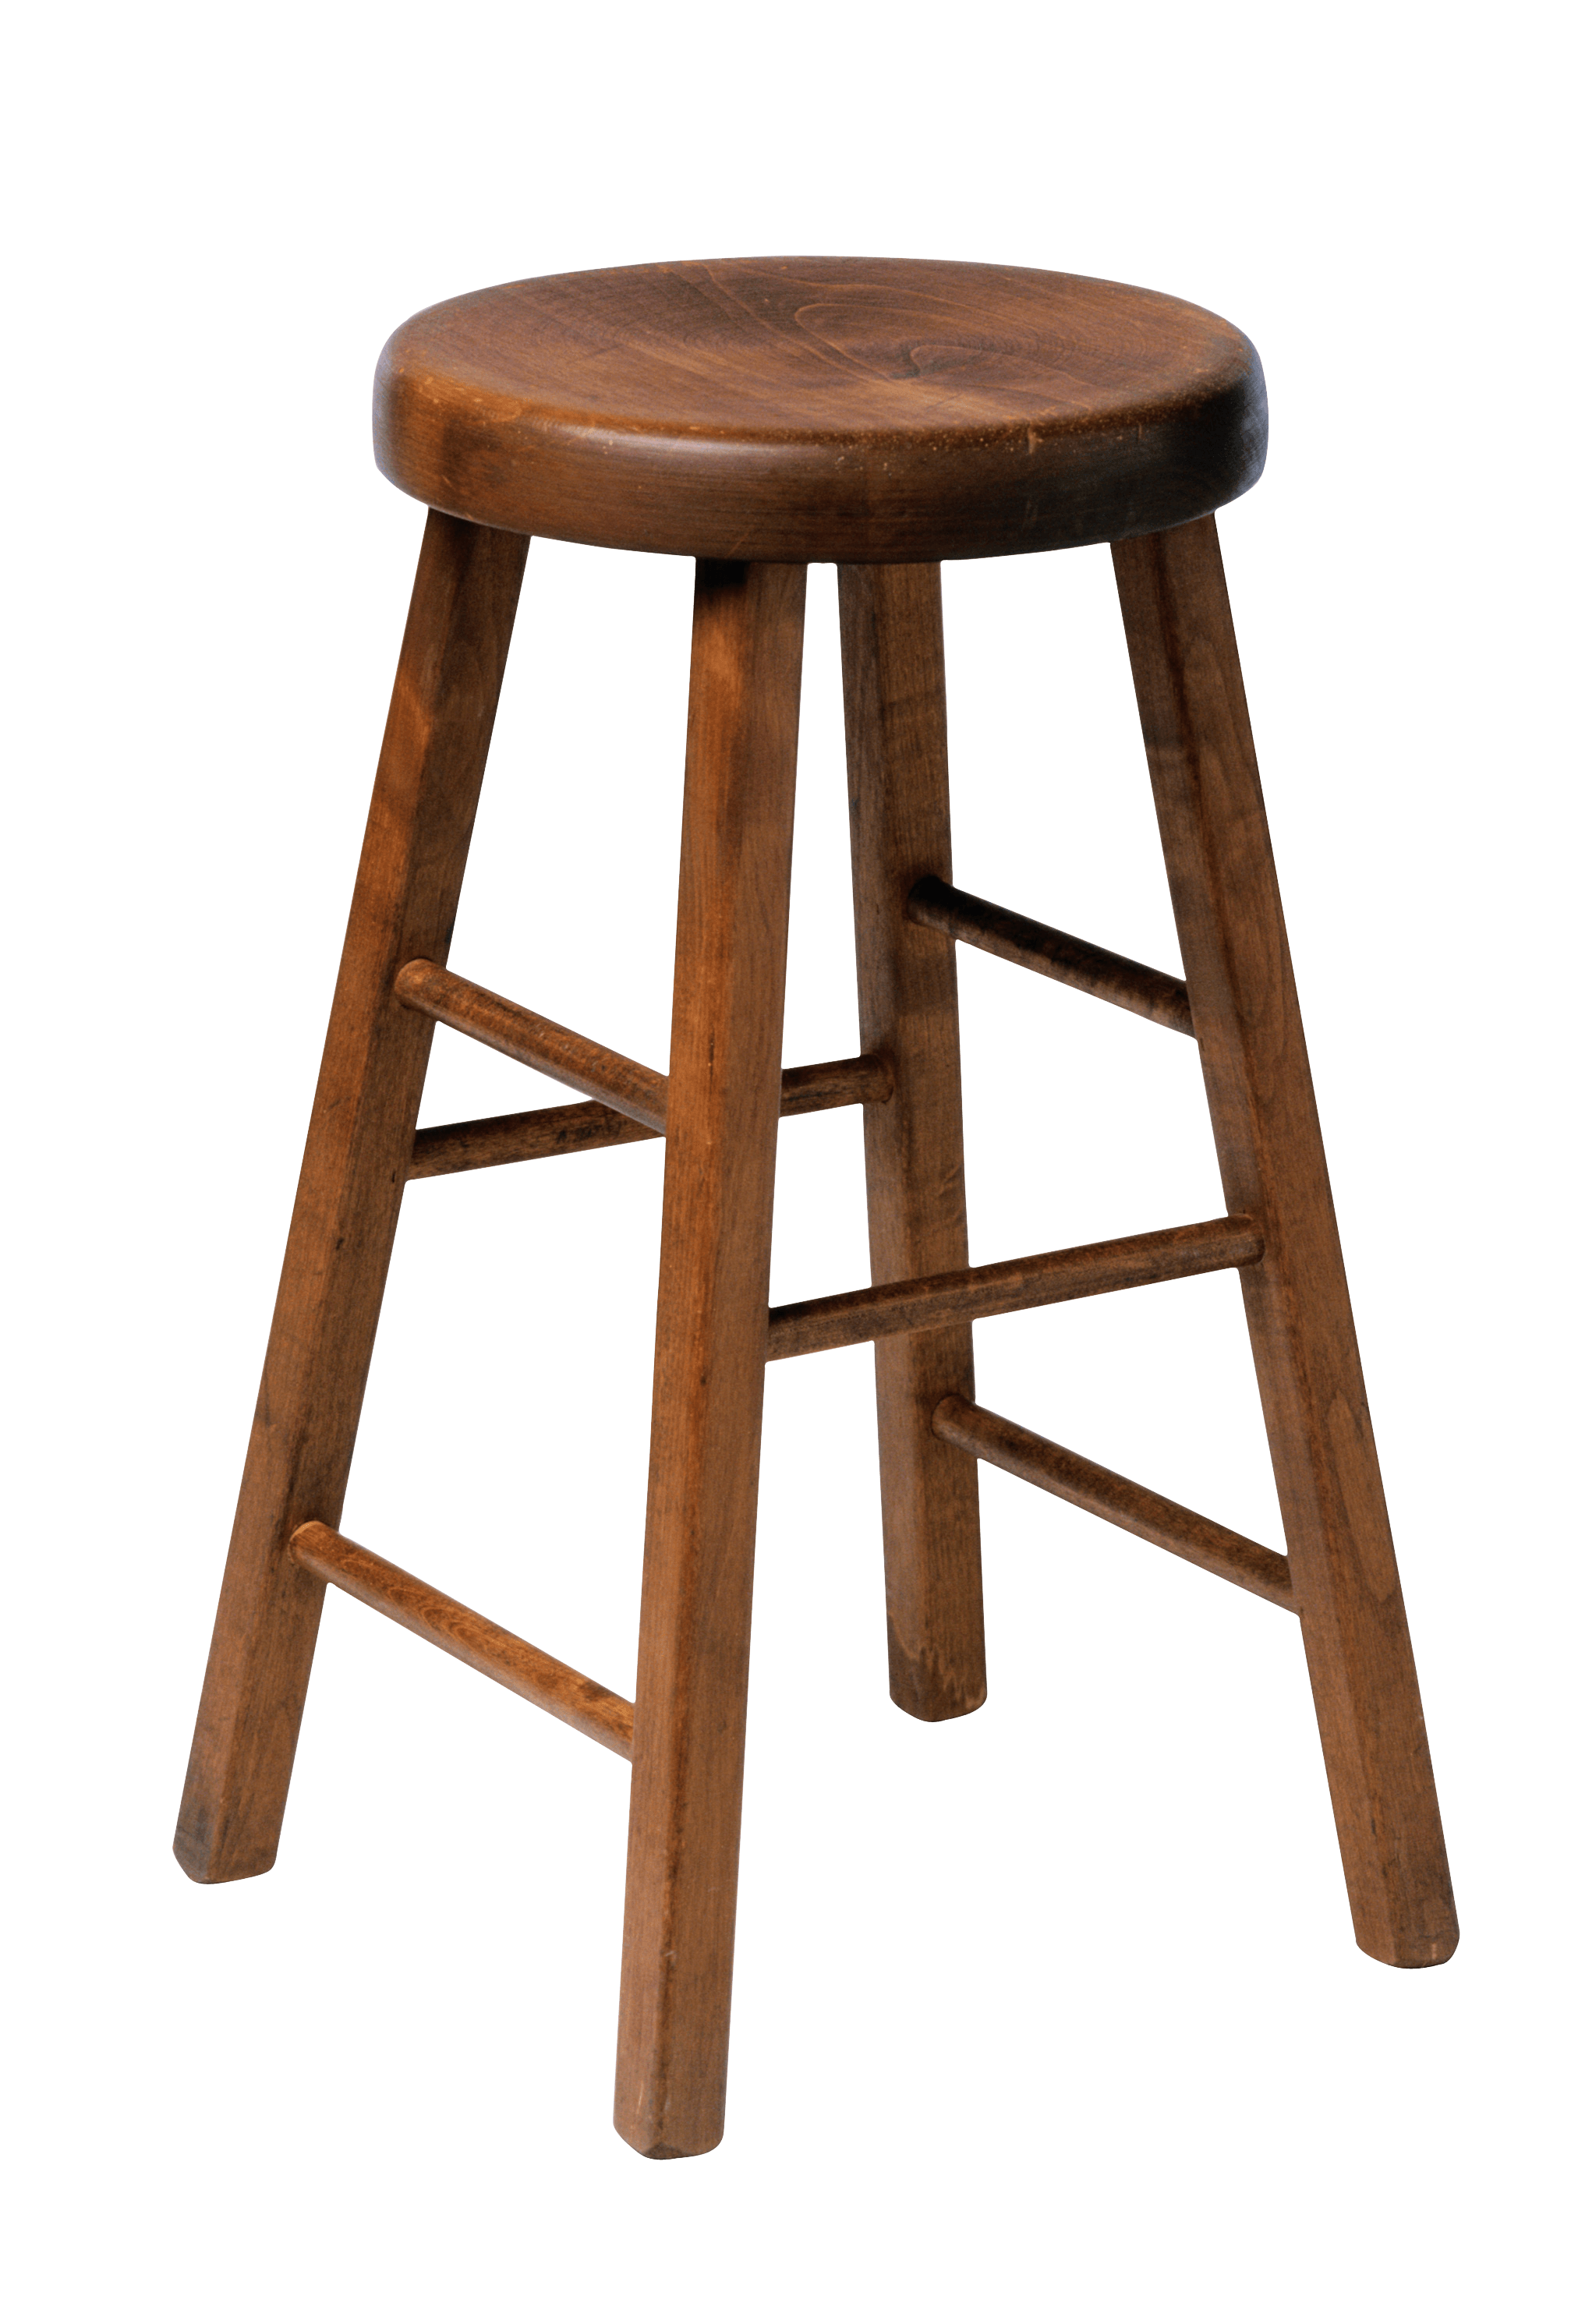 Wooden Chair PNG Image in Transparent pngteam.com